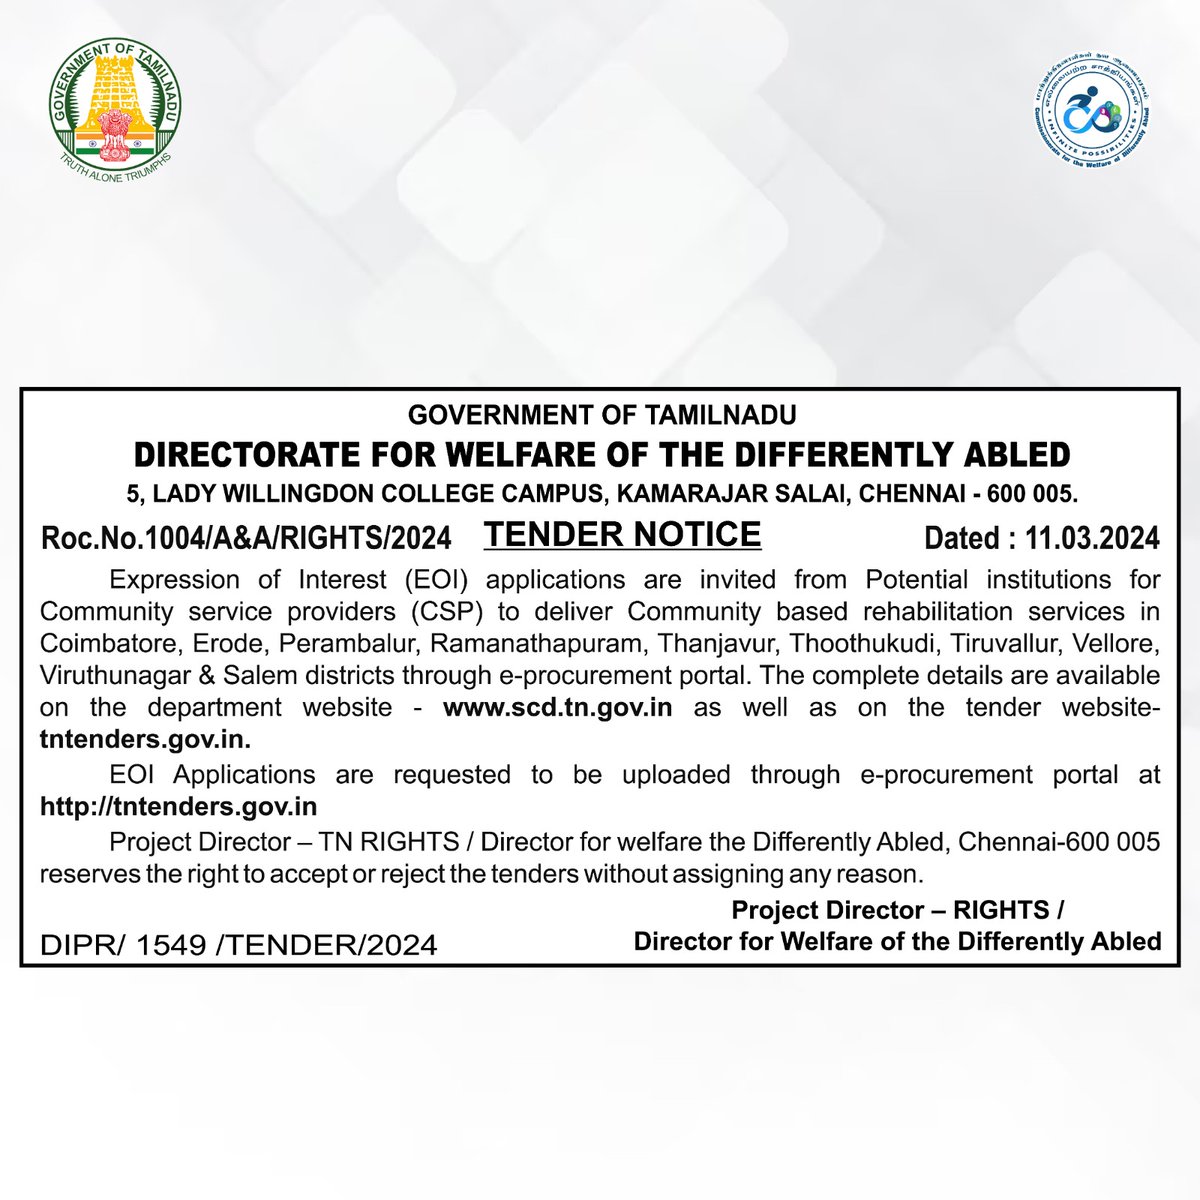 Attention potential partner! Directorate of Welfare of the Differently Abled is seeking expressions of interest from institutions to deliver Community Based Rehabilitation Services. Join us in making a difference! #CommunityRehabilitation #TNRights #JoinUs